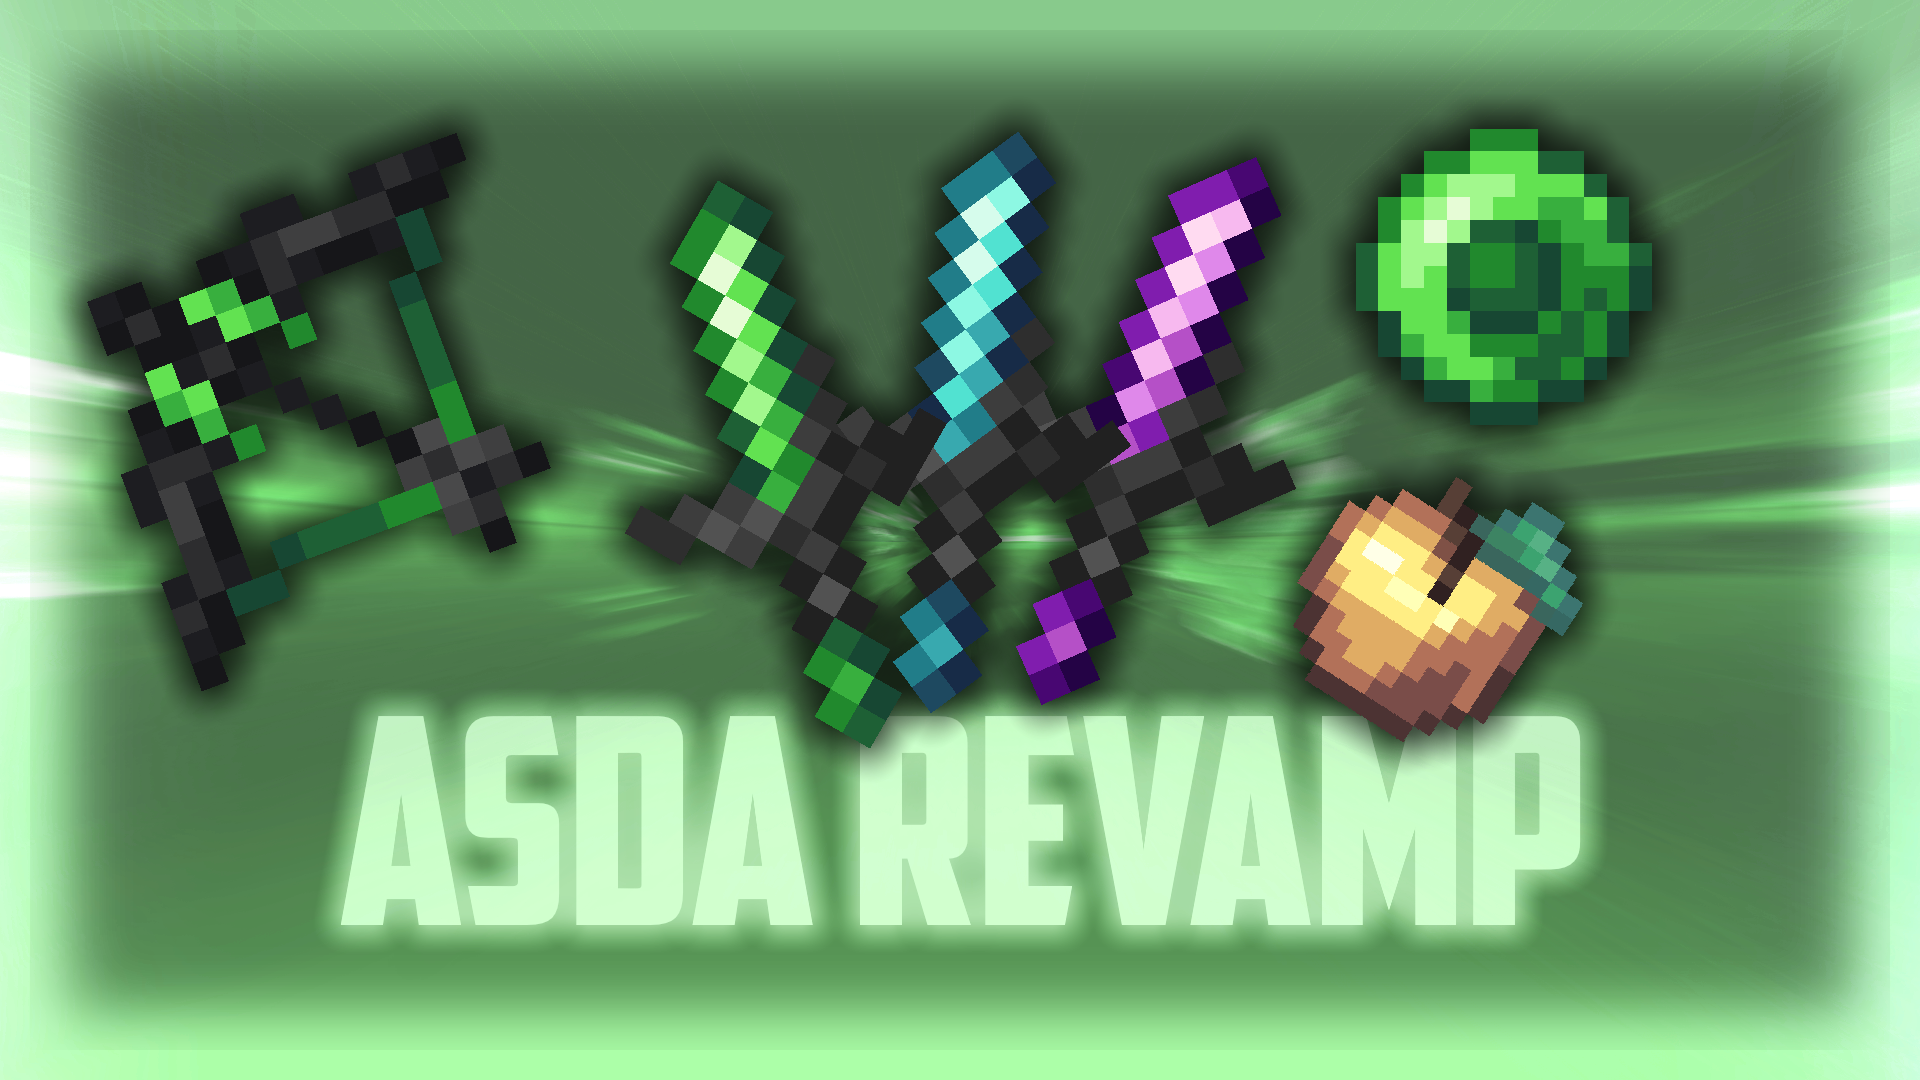 Asda Revamp  16x by Zlax on PvPRP